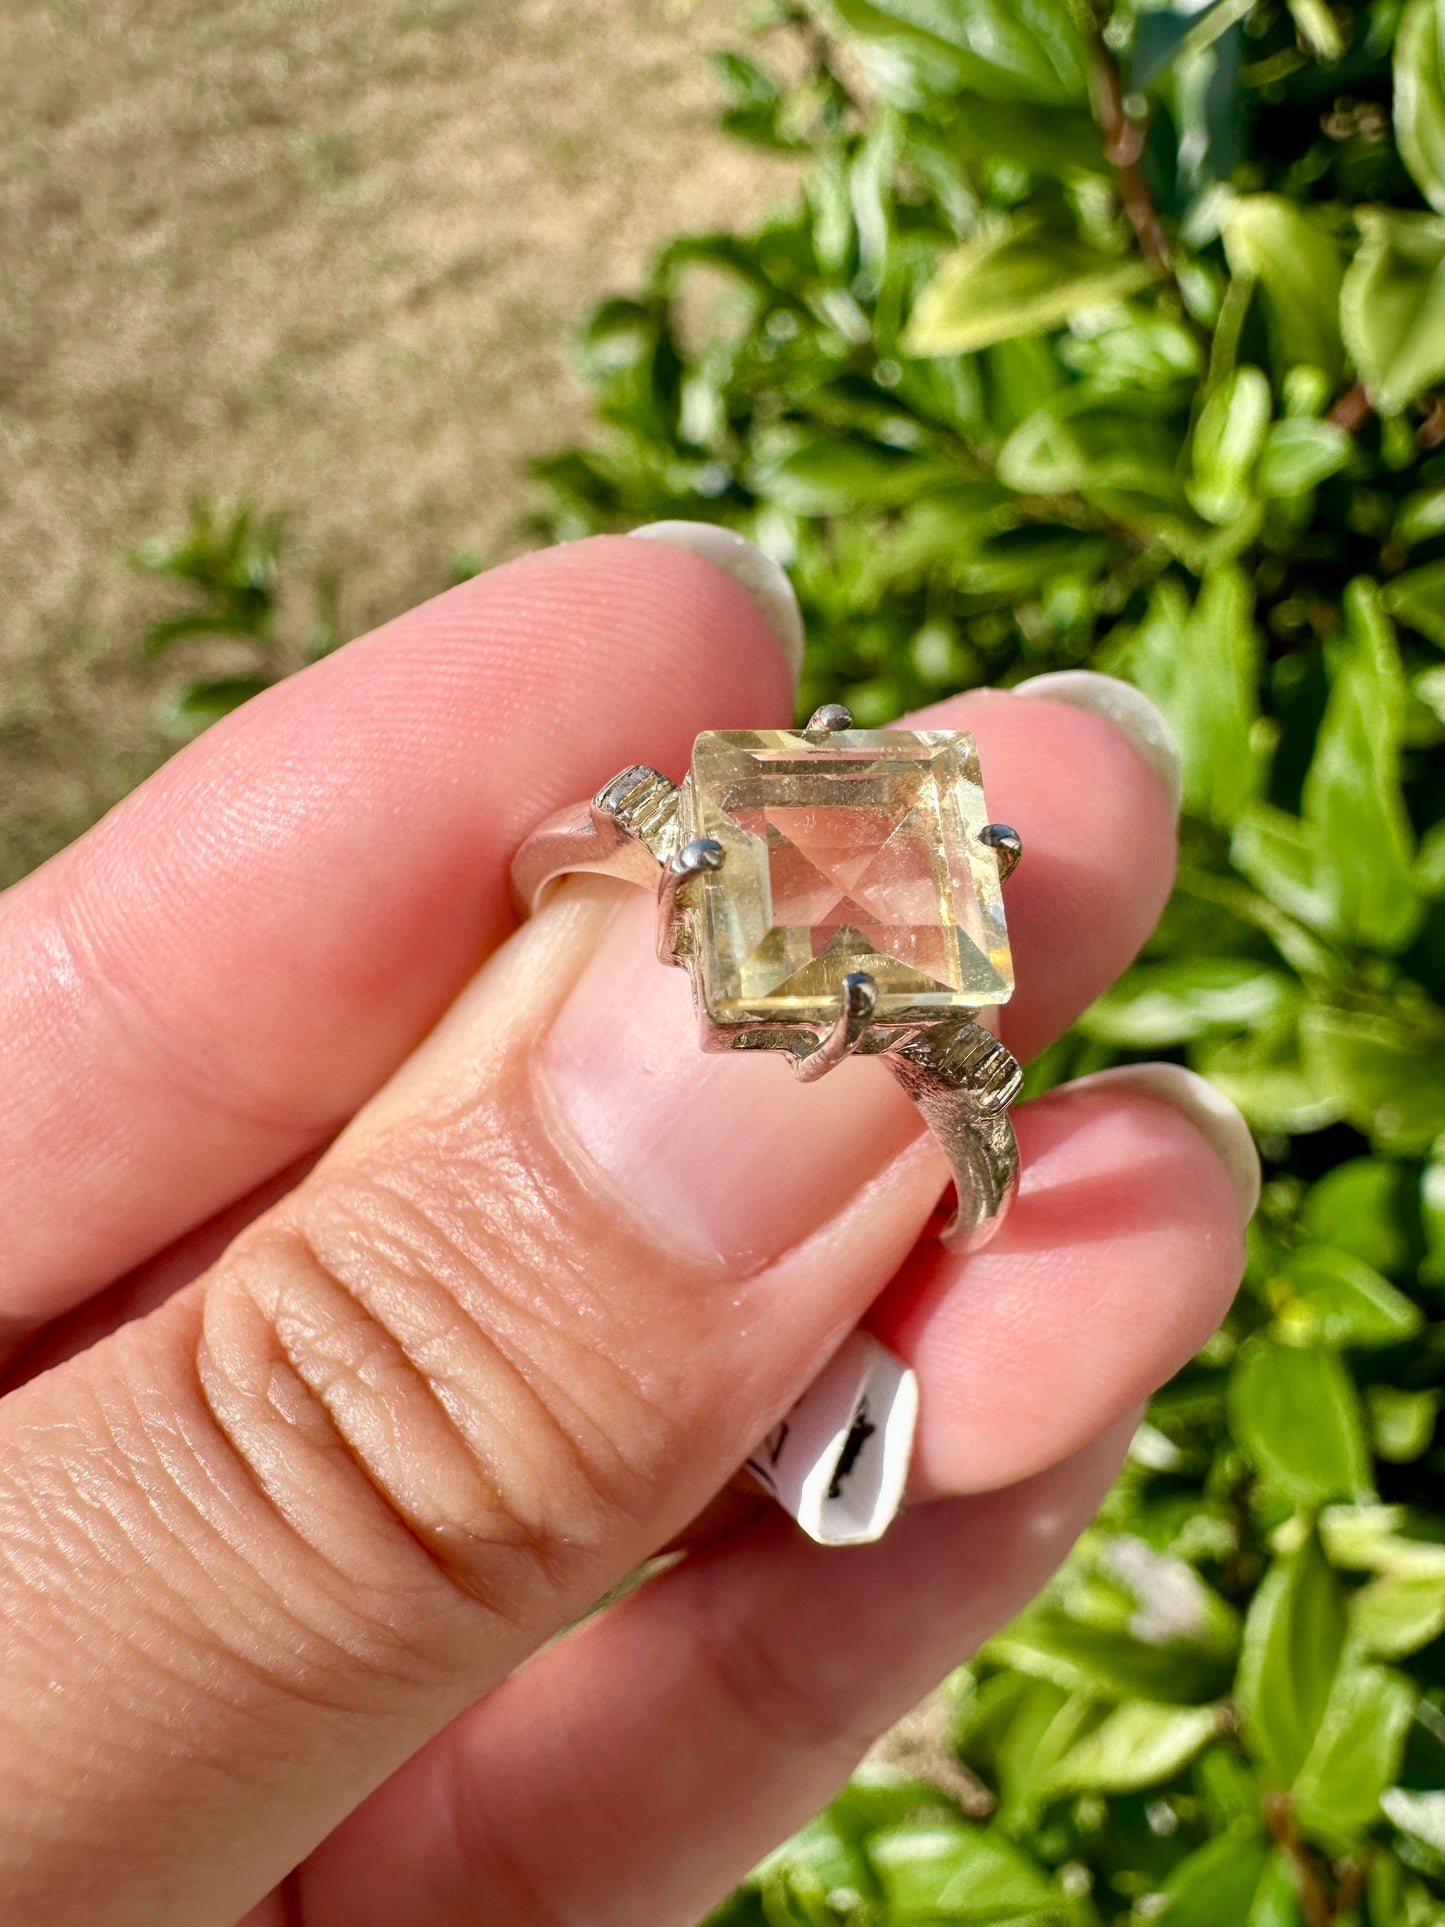 Citrine Sterling Silver Ring Size 9 - Elegant Jewelry for Prosperity and Joy, Perfect for Enhancing Positive Energy and Personal Style